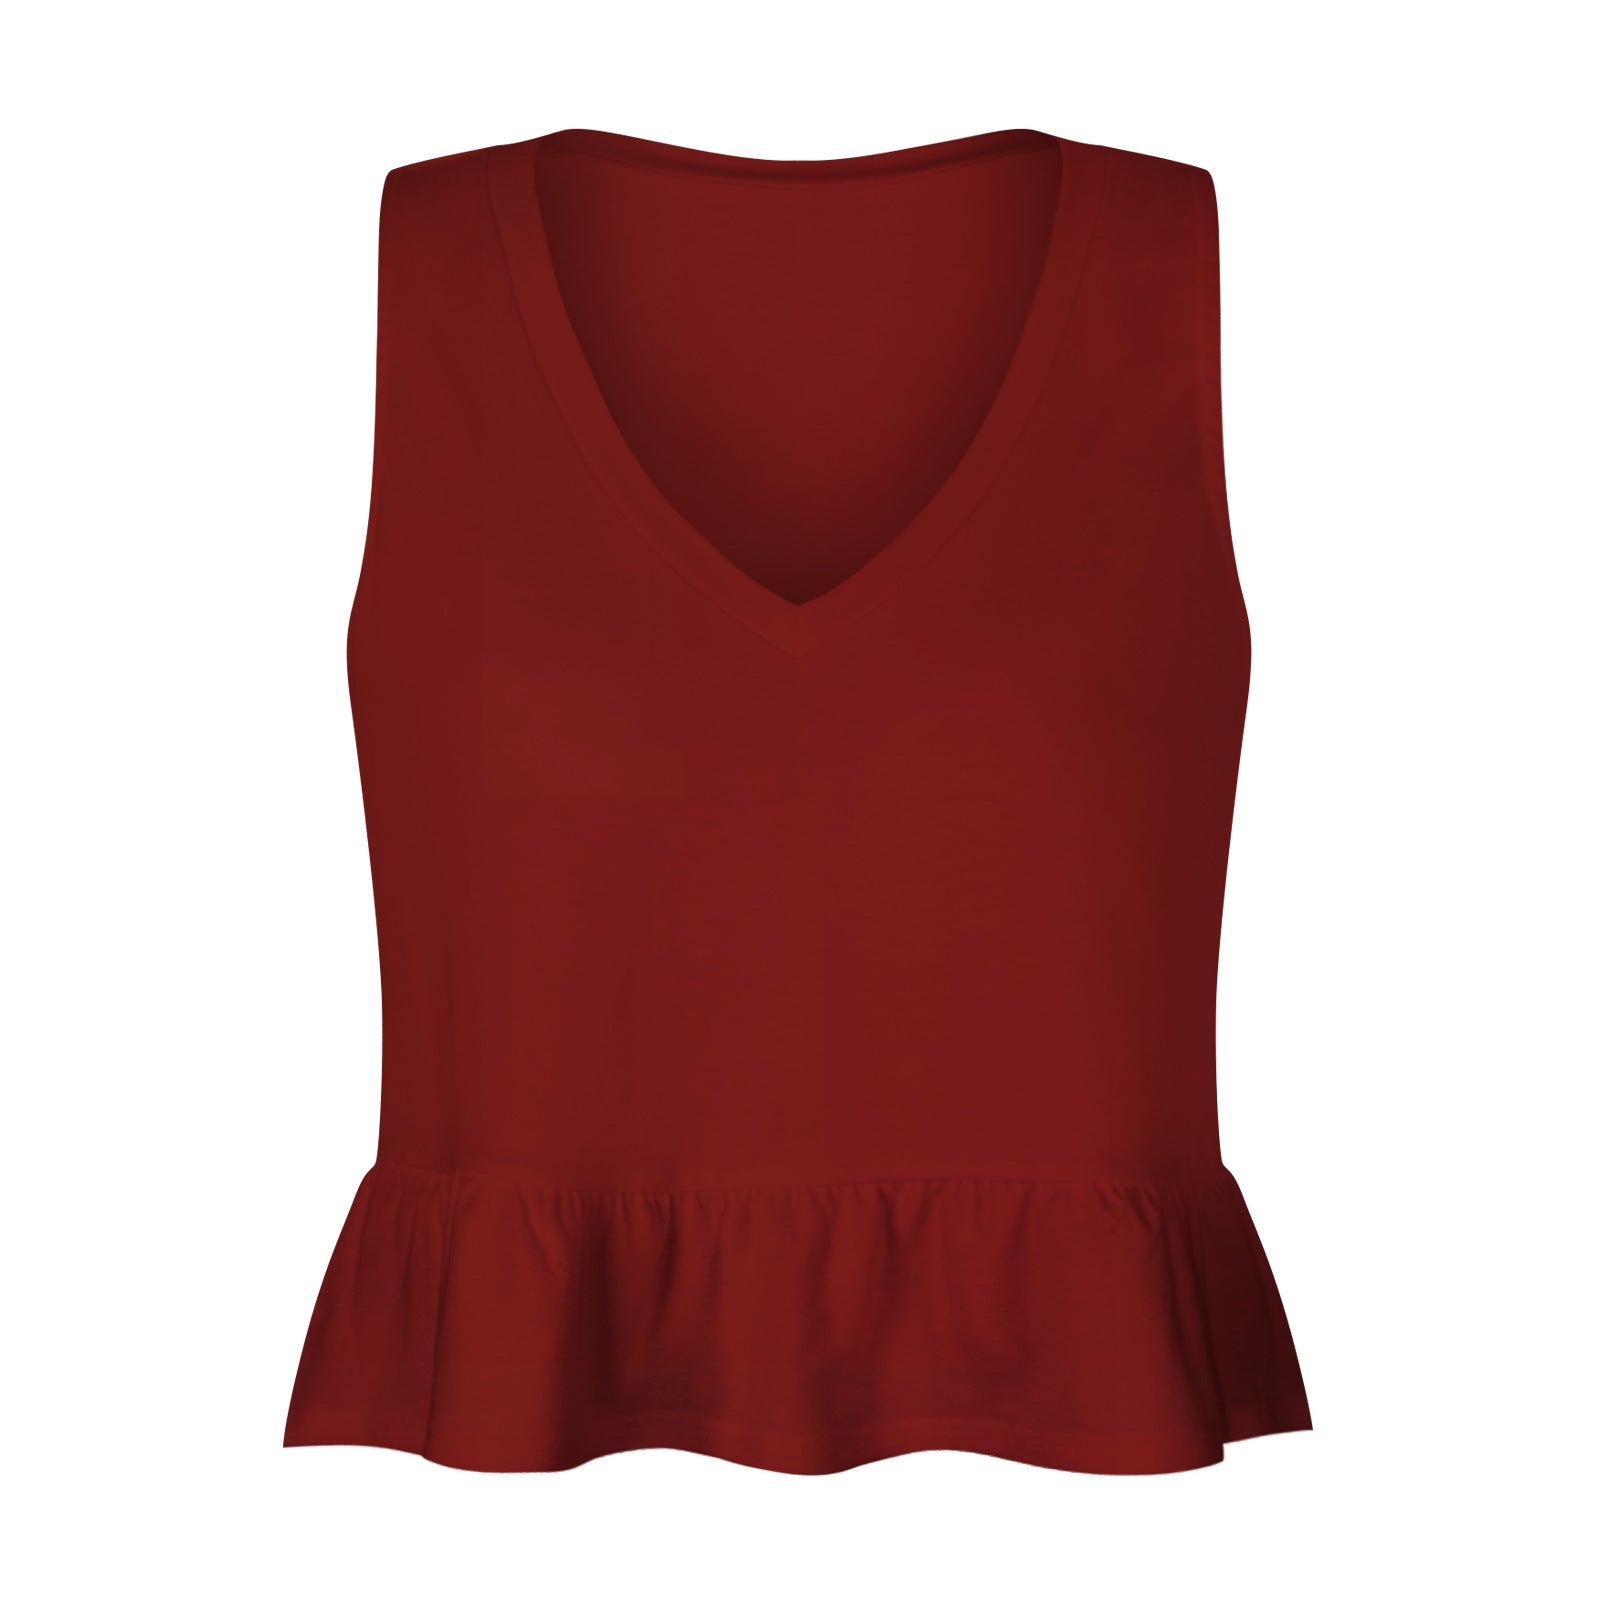 V-neck Loose Fit Sleeveless Top tank tops malbusaat.co.uk